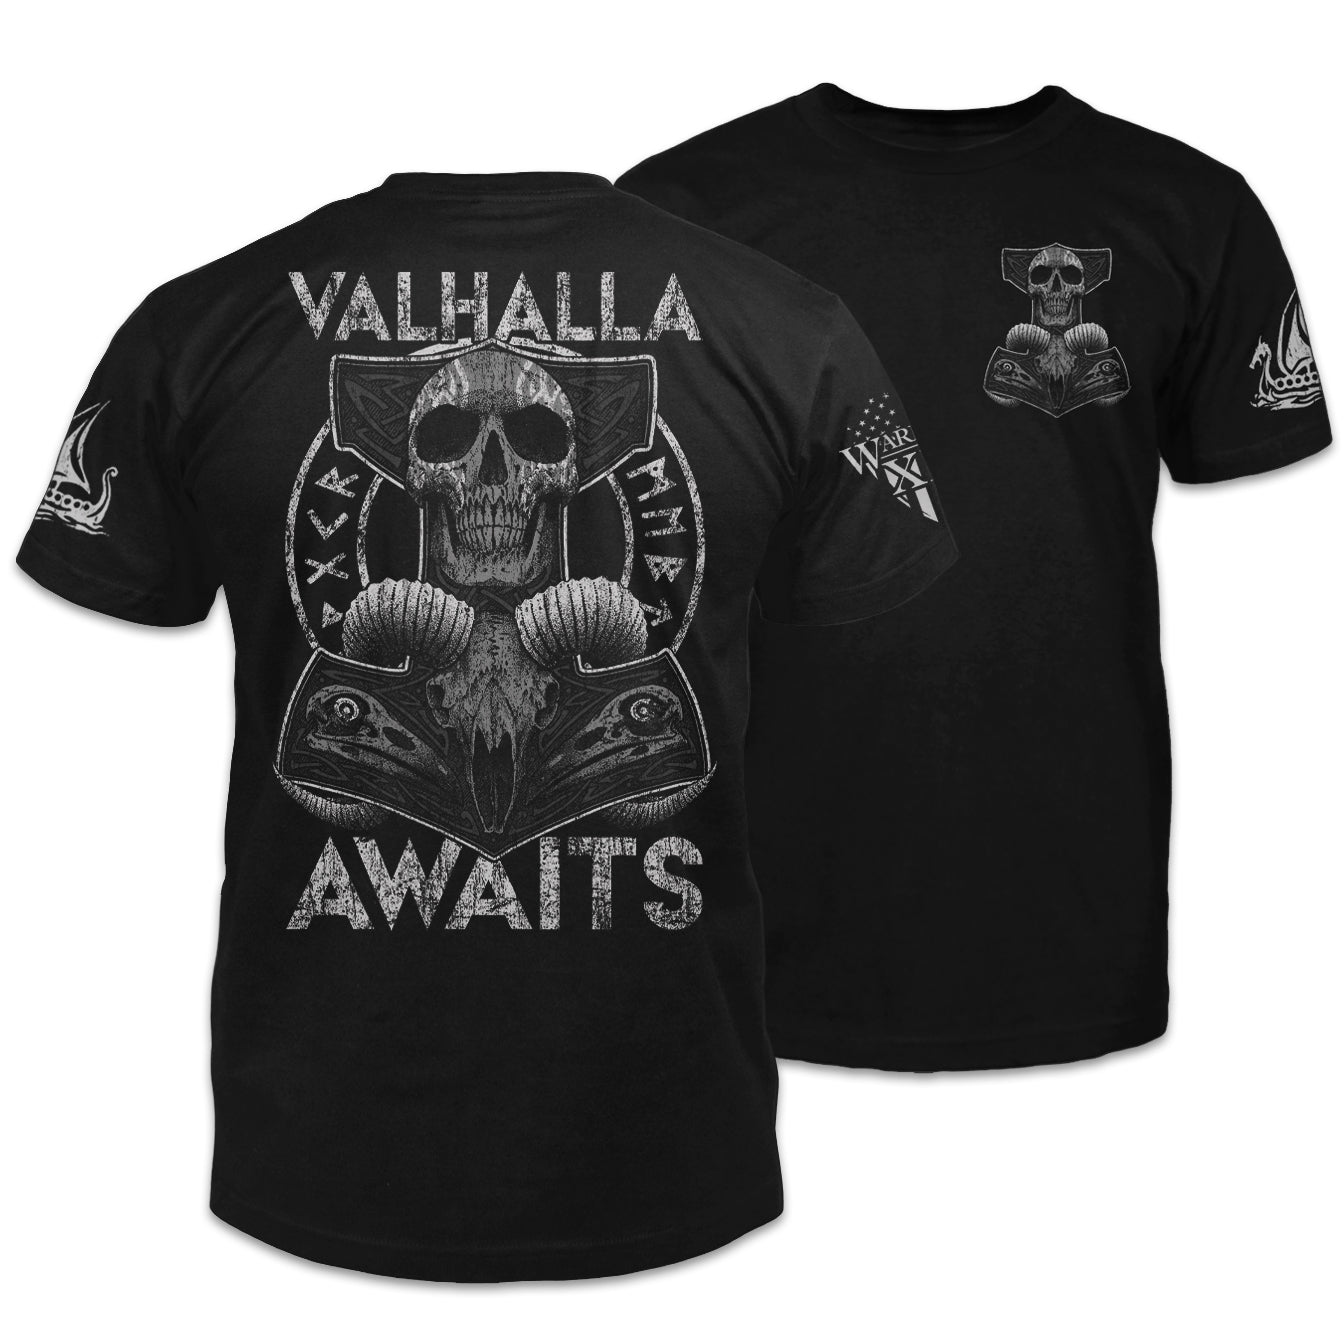 Front & back black t-shirt features a Thor's hammer skull design. The ram skull symbolizes the rams that pulled Thor's chariot. 